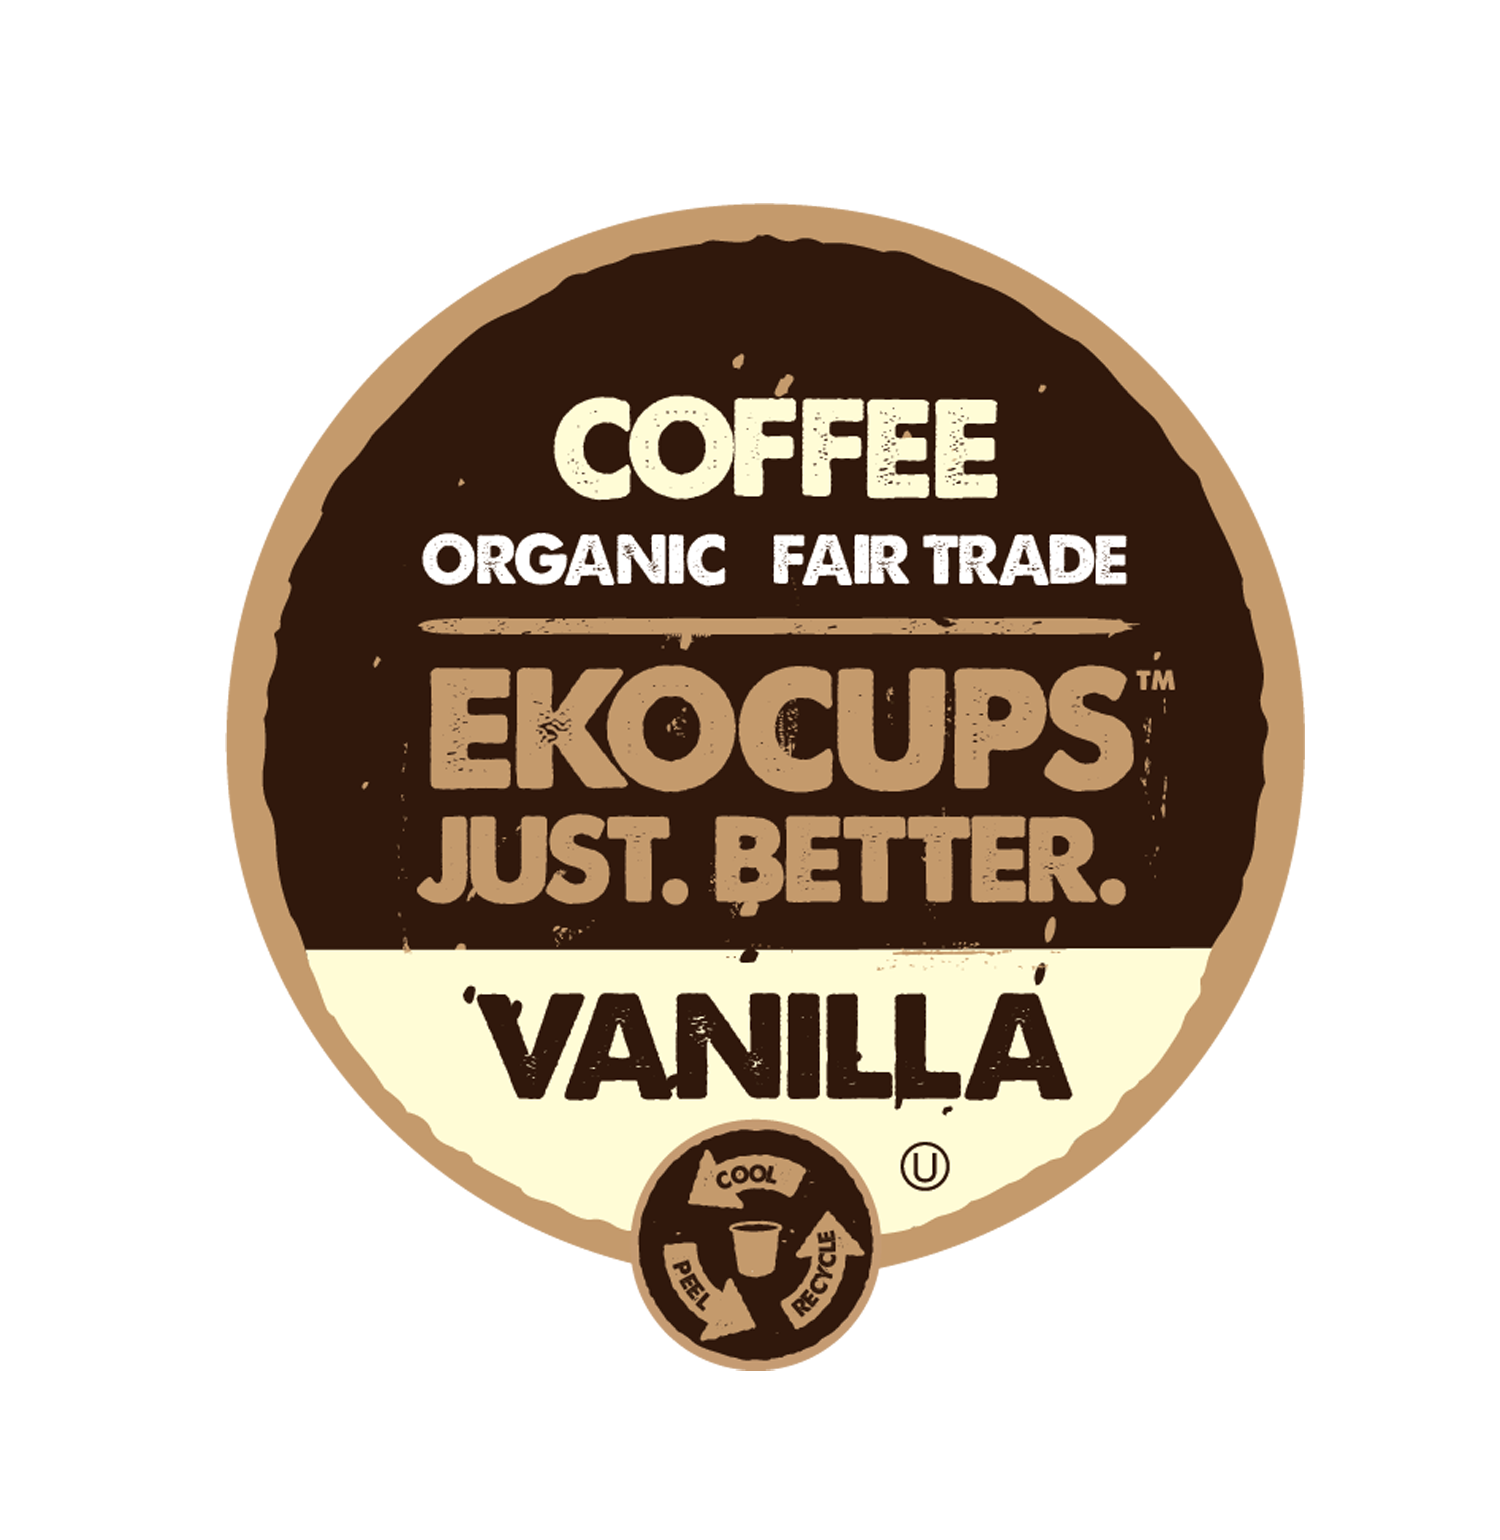 USDA Certified Organic and Fair Trade Gourmet Coffee for Keurig Kcup brewers, Vanilla, 40 Count